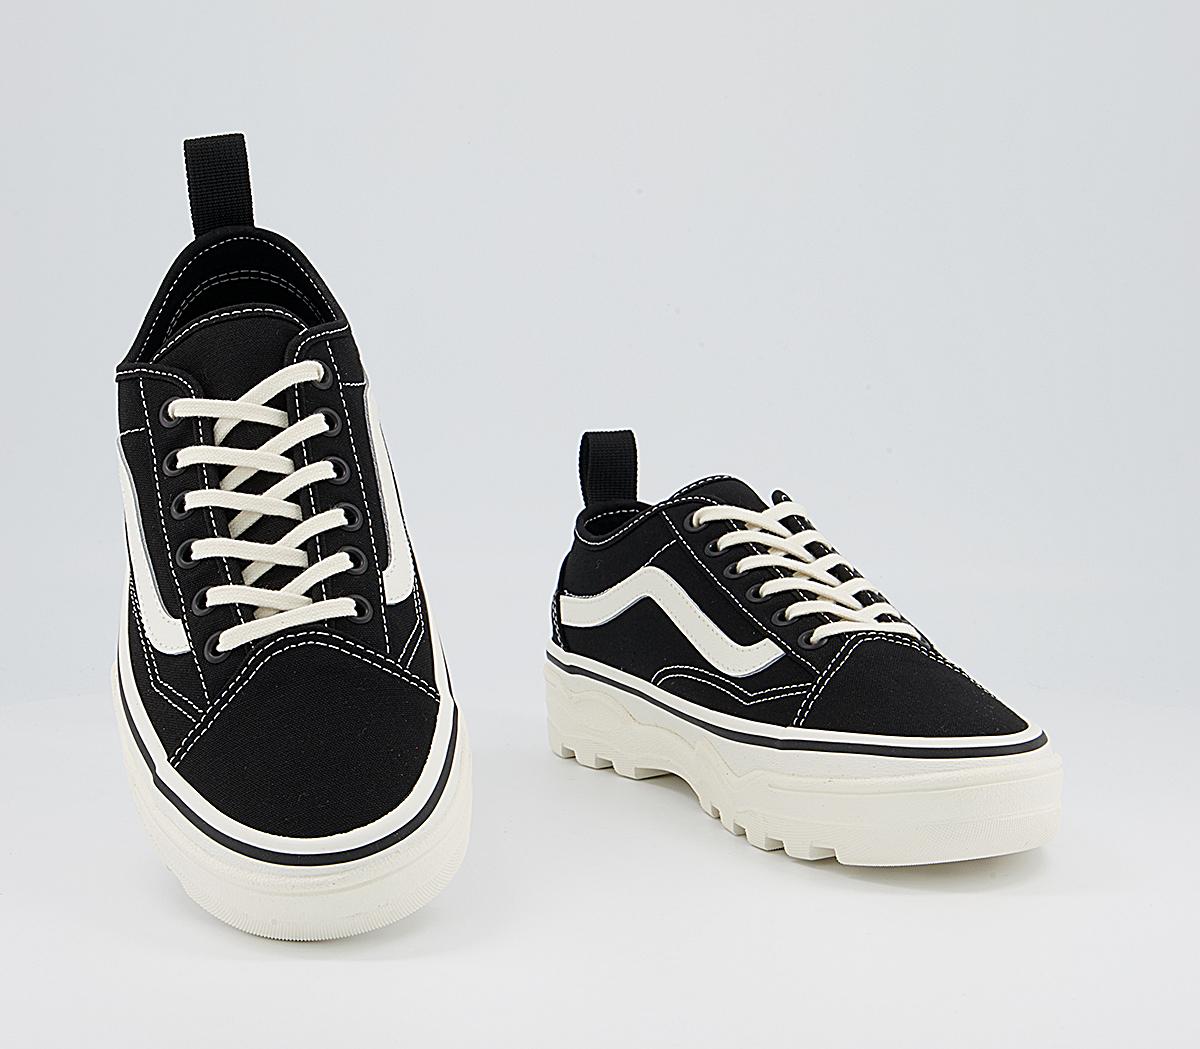 Vans Sentry Old Skool Trainers Black White Marshmellow - Hers trainers